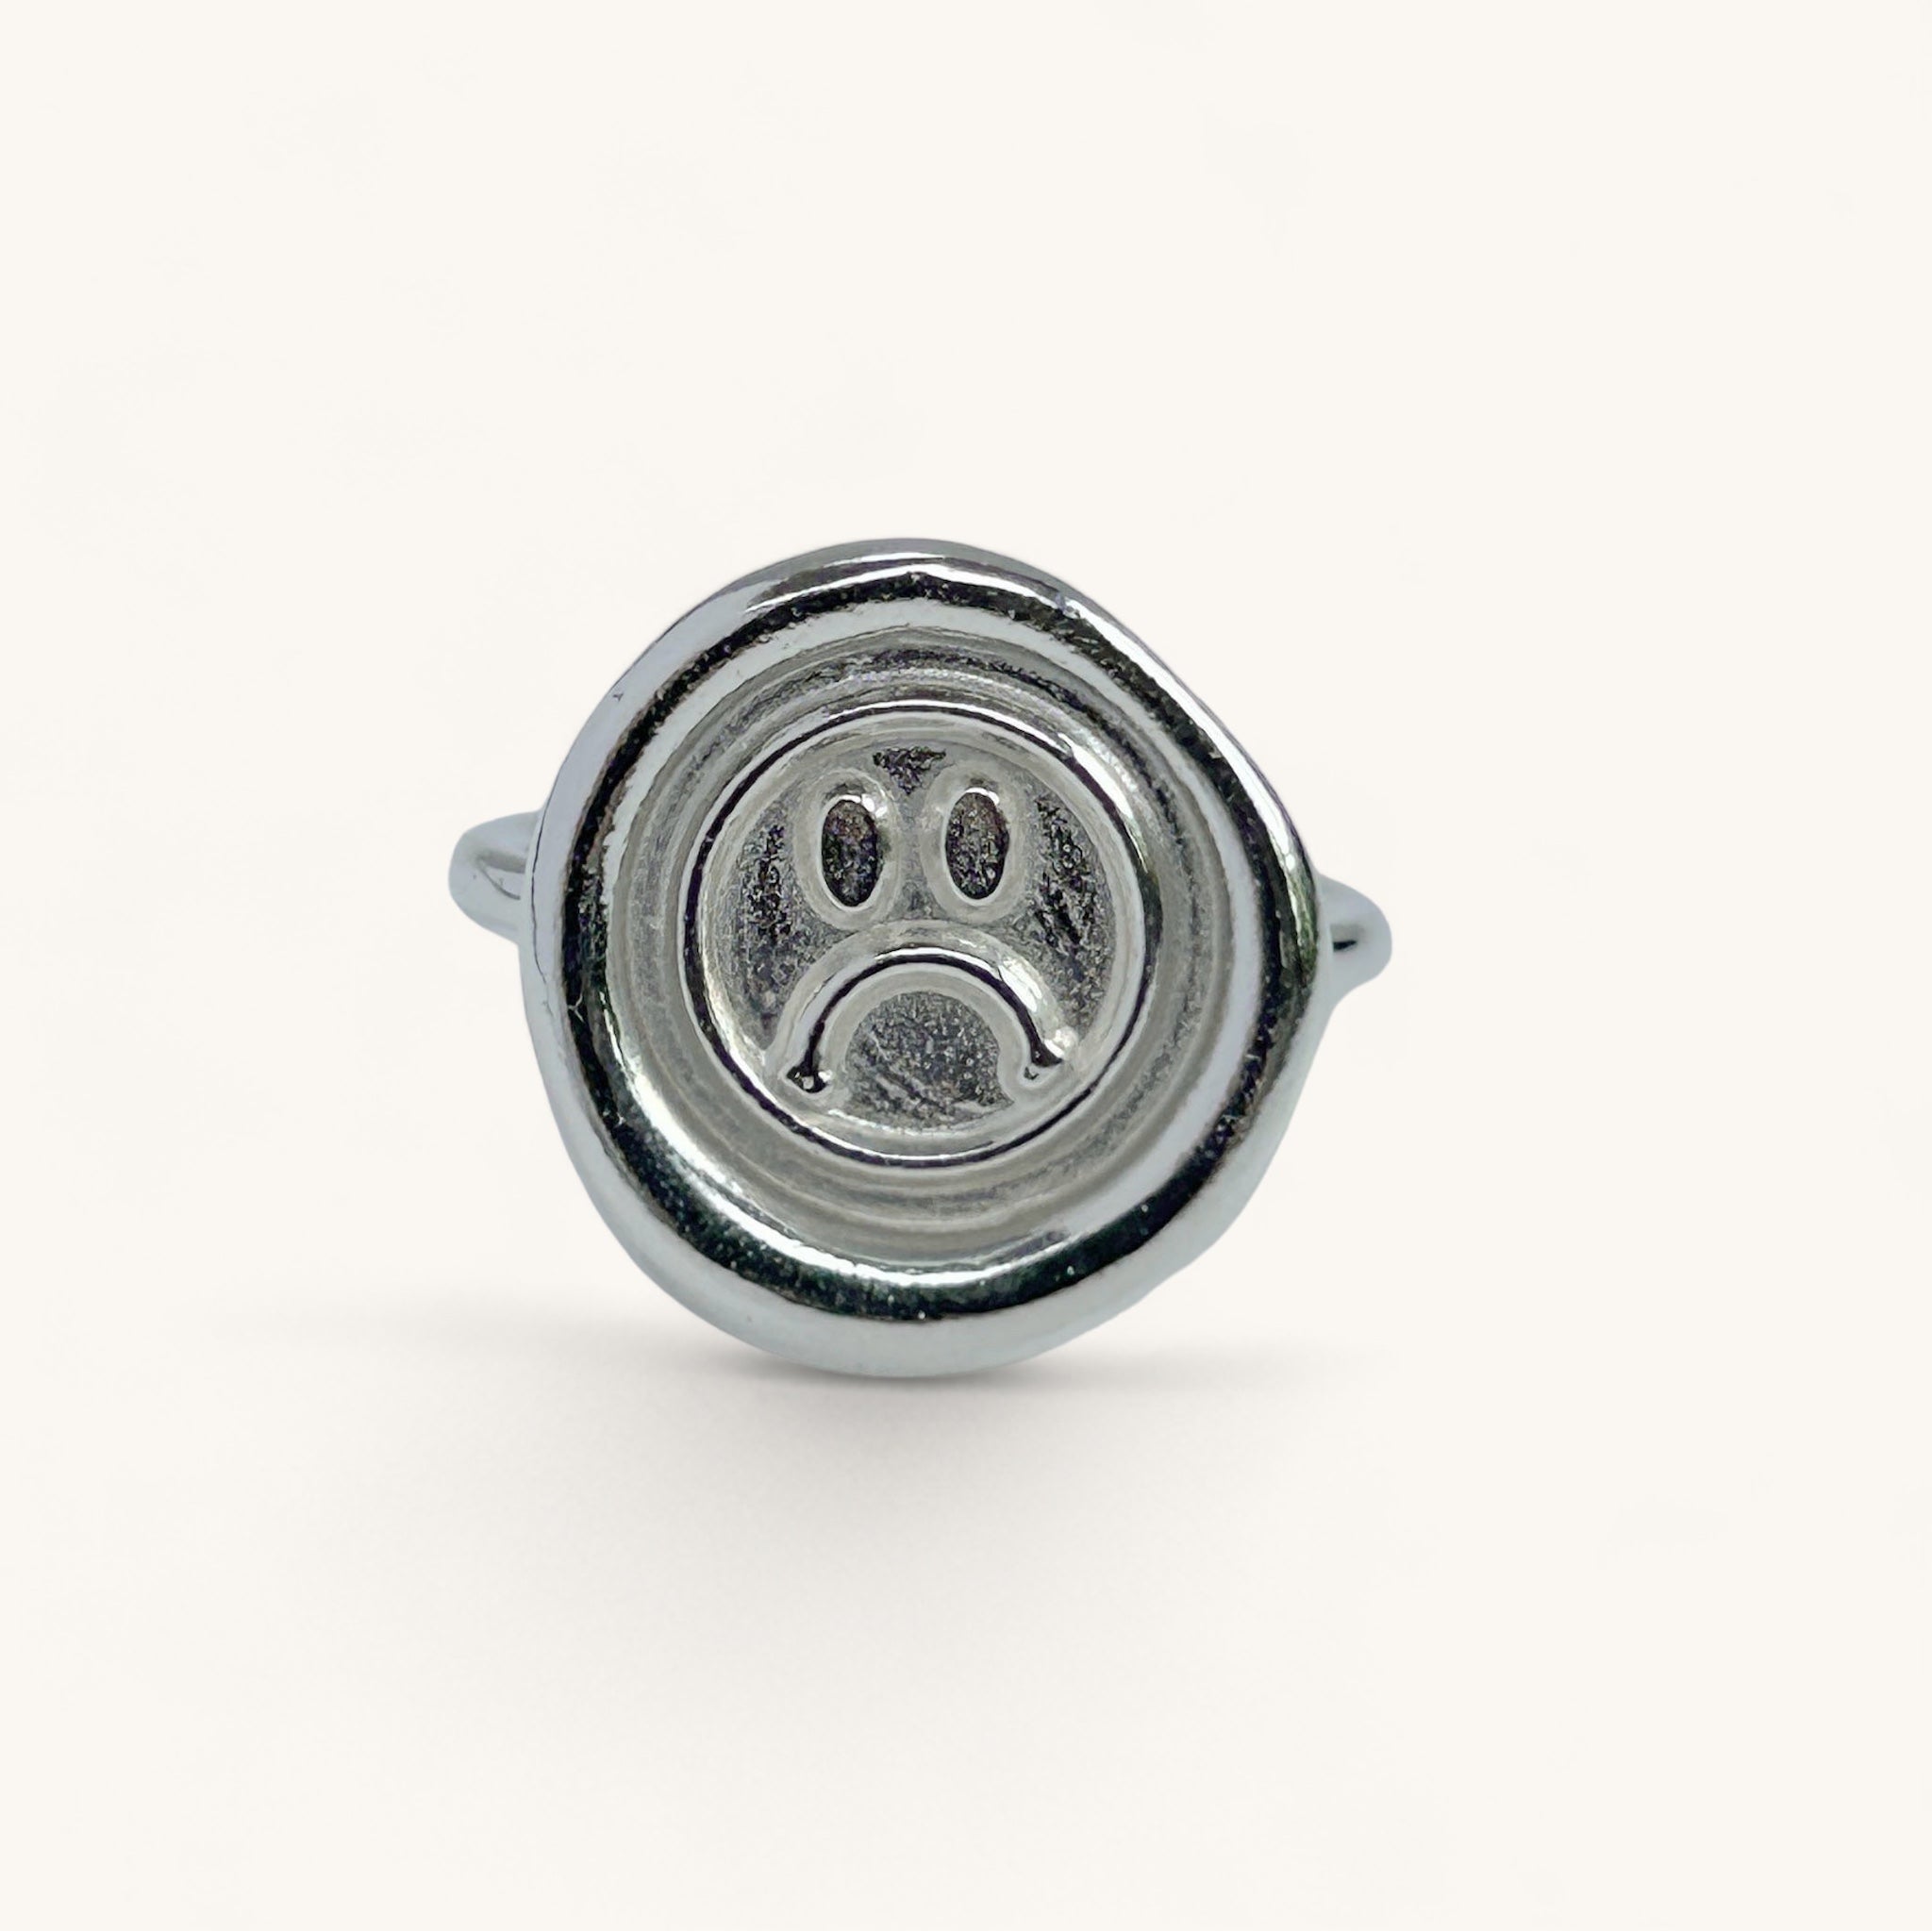 Jennifer Loiselle recycled Silver Sad Face Ring